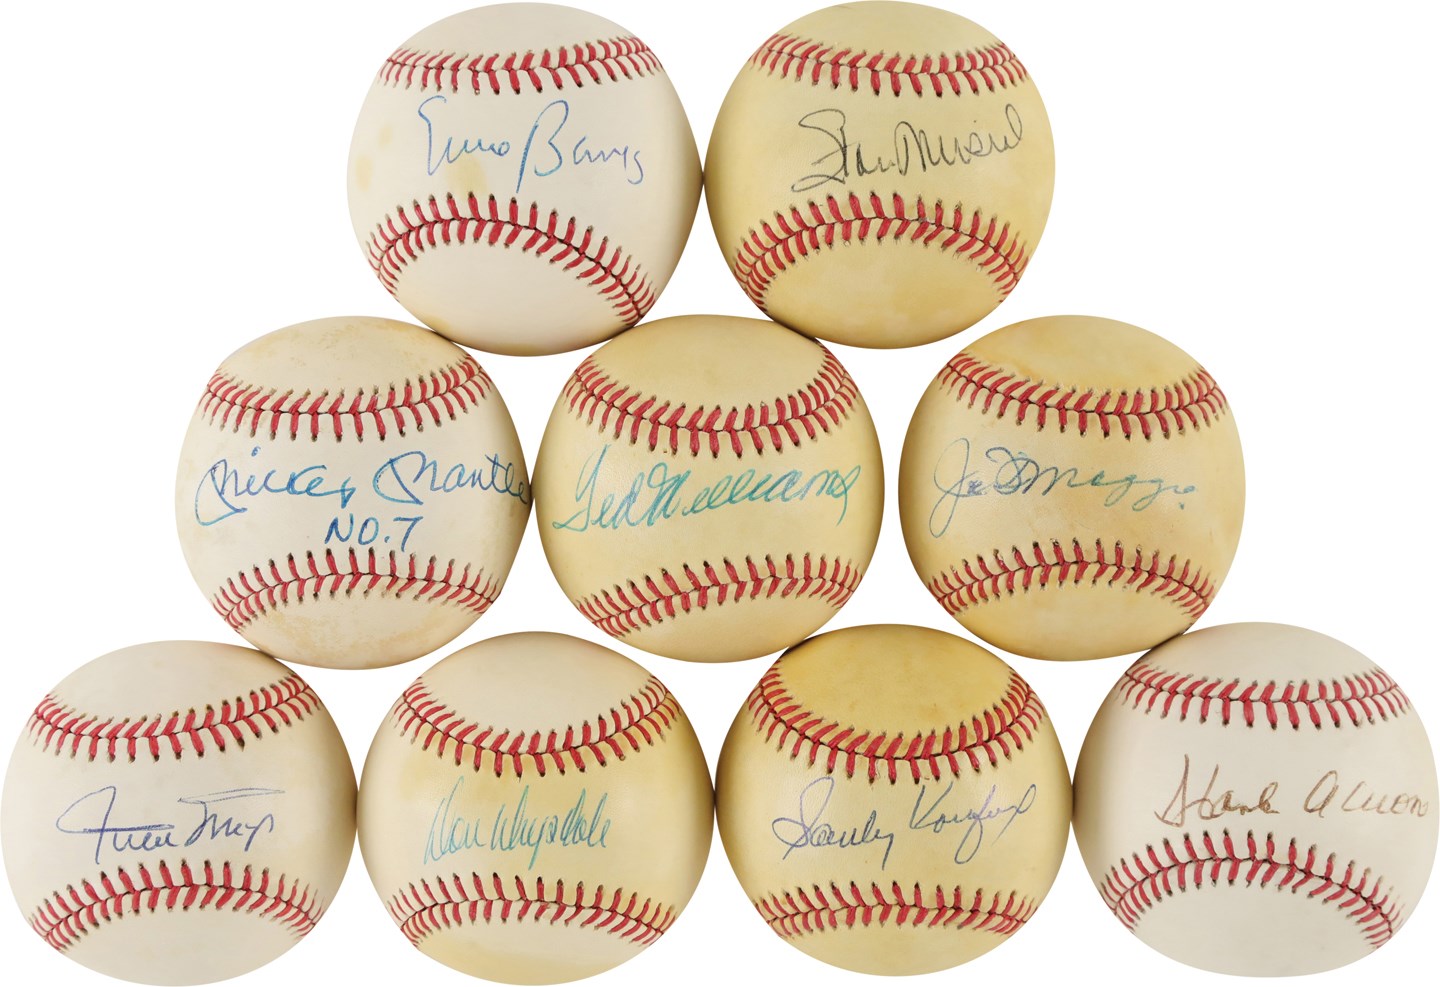 Baseball Autographs - Hall of Famers & Stars Signed Baseball Collection w/Mantle, DiMaggio & Williams (46)